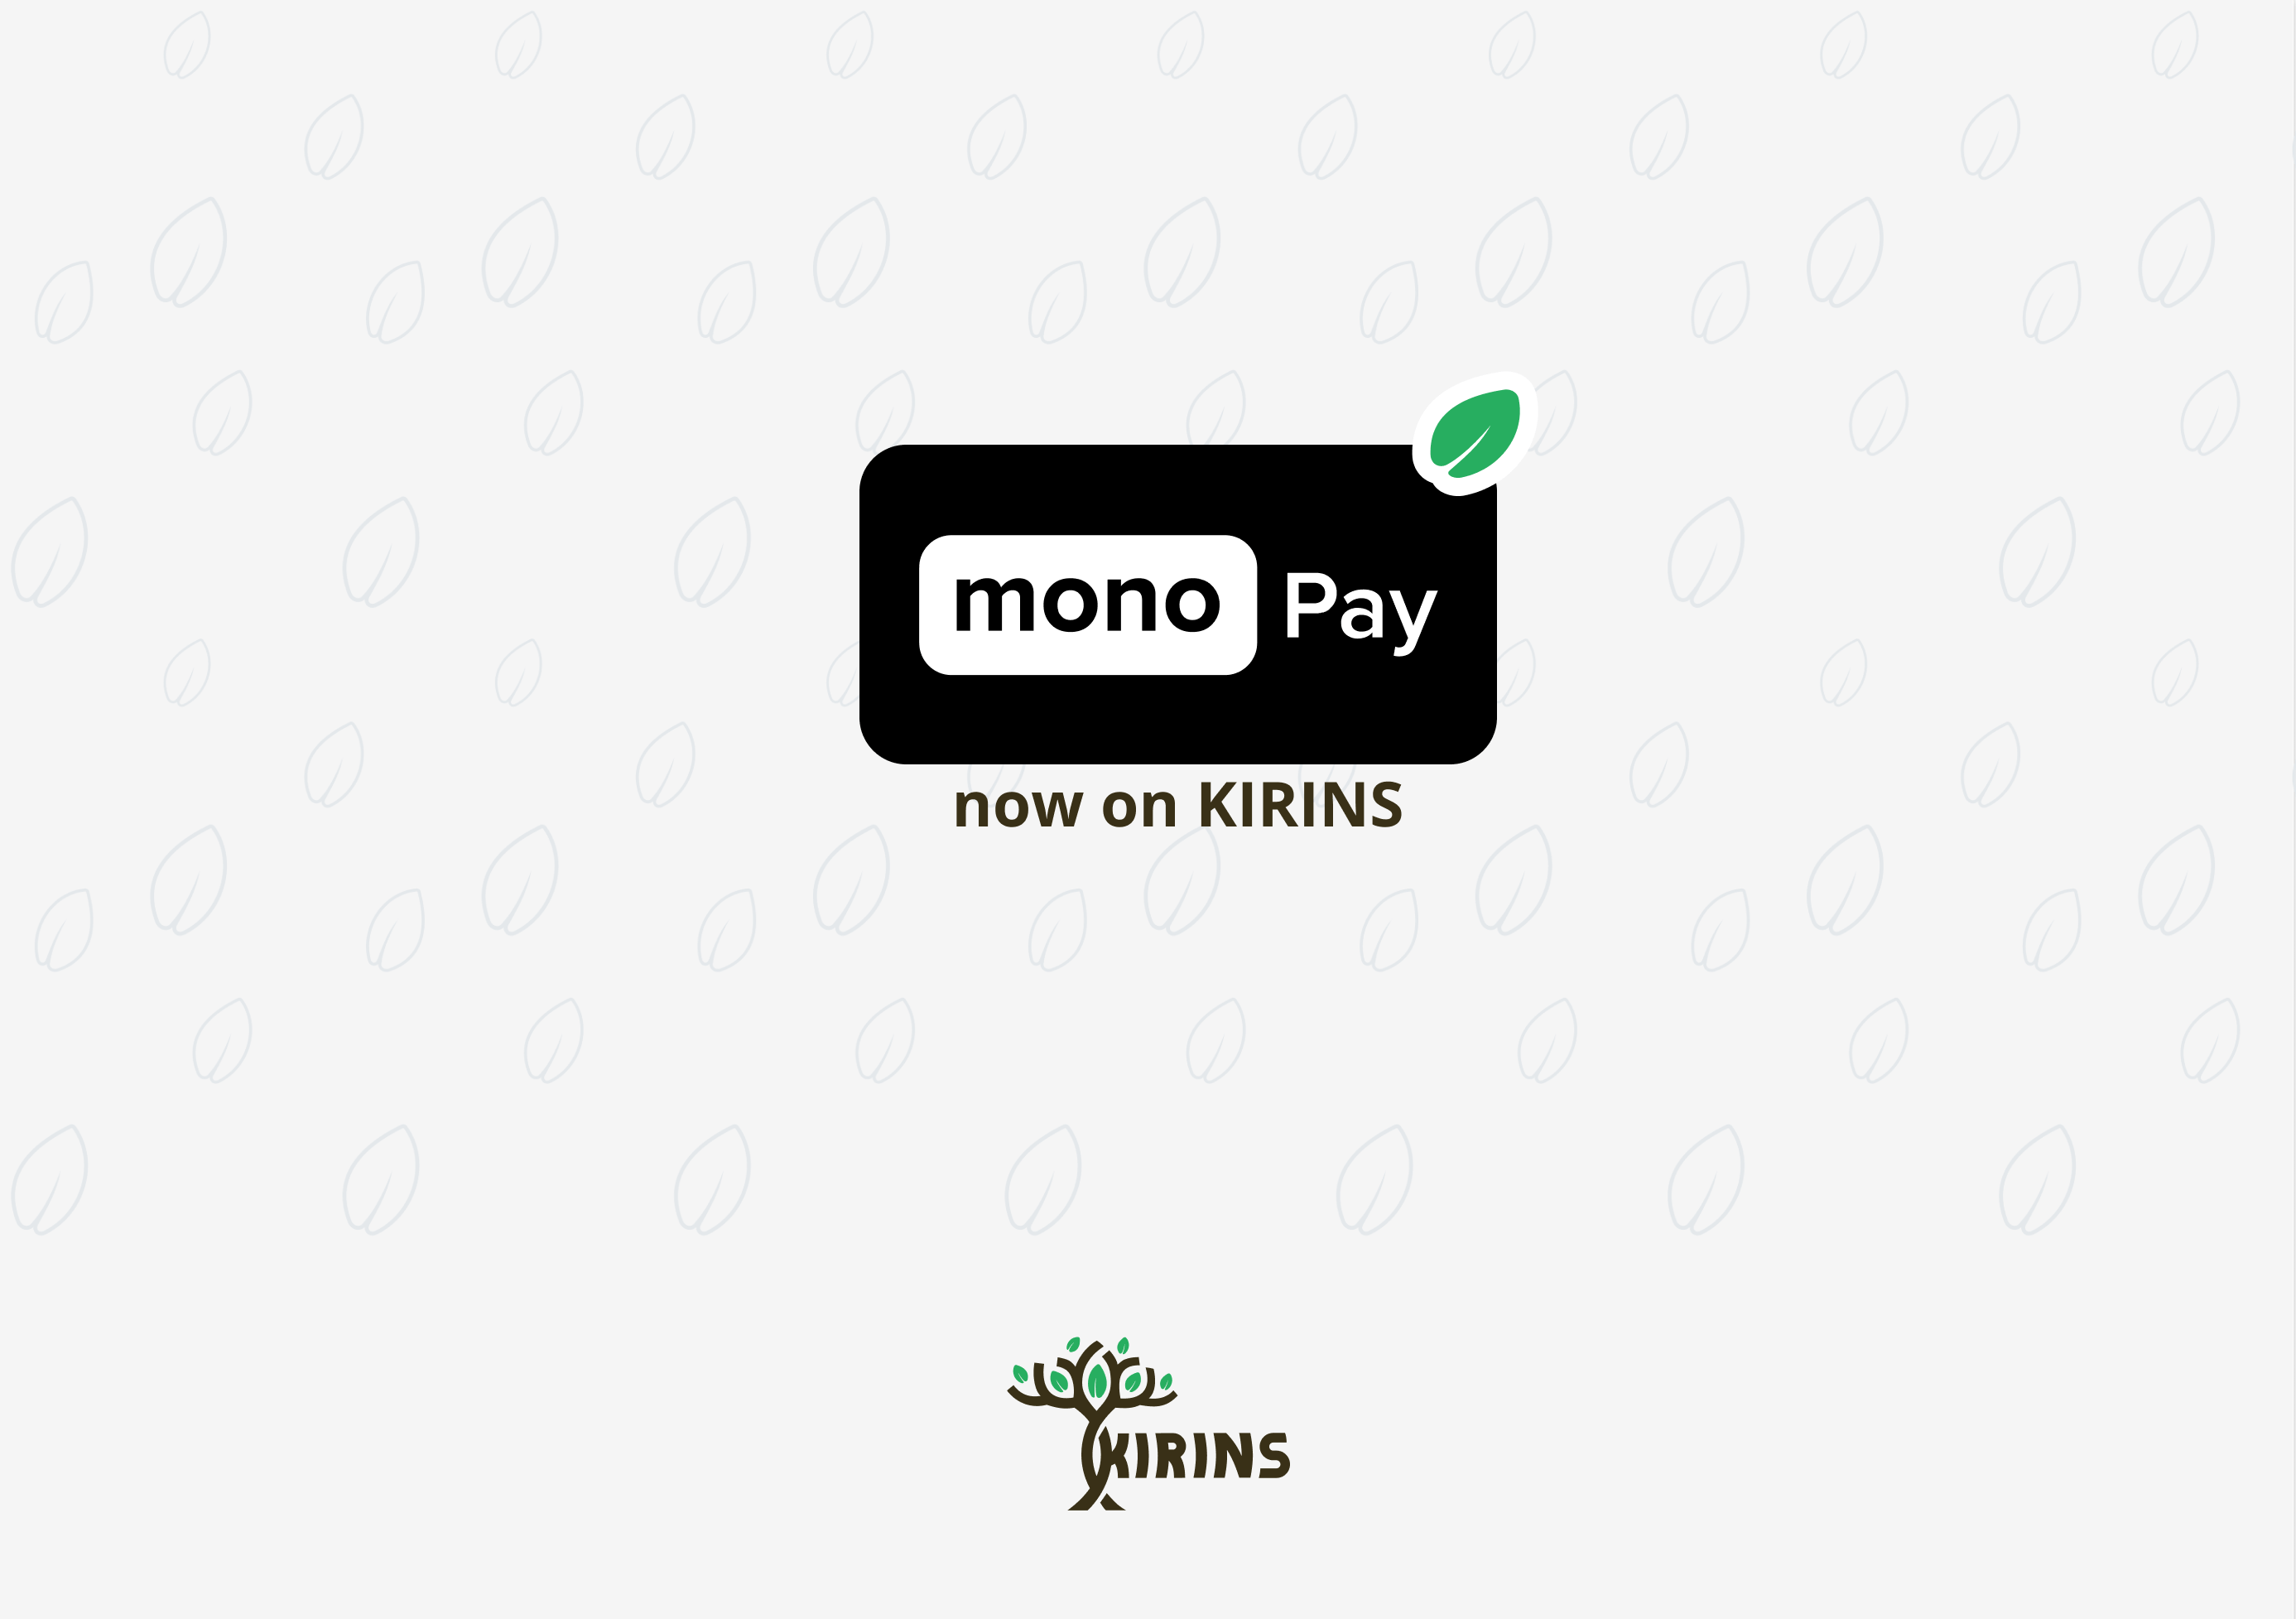 Payment for additional assistance monobank on KIRINS